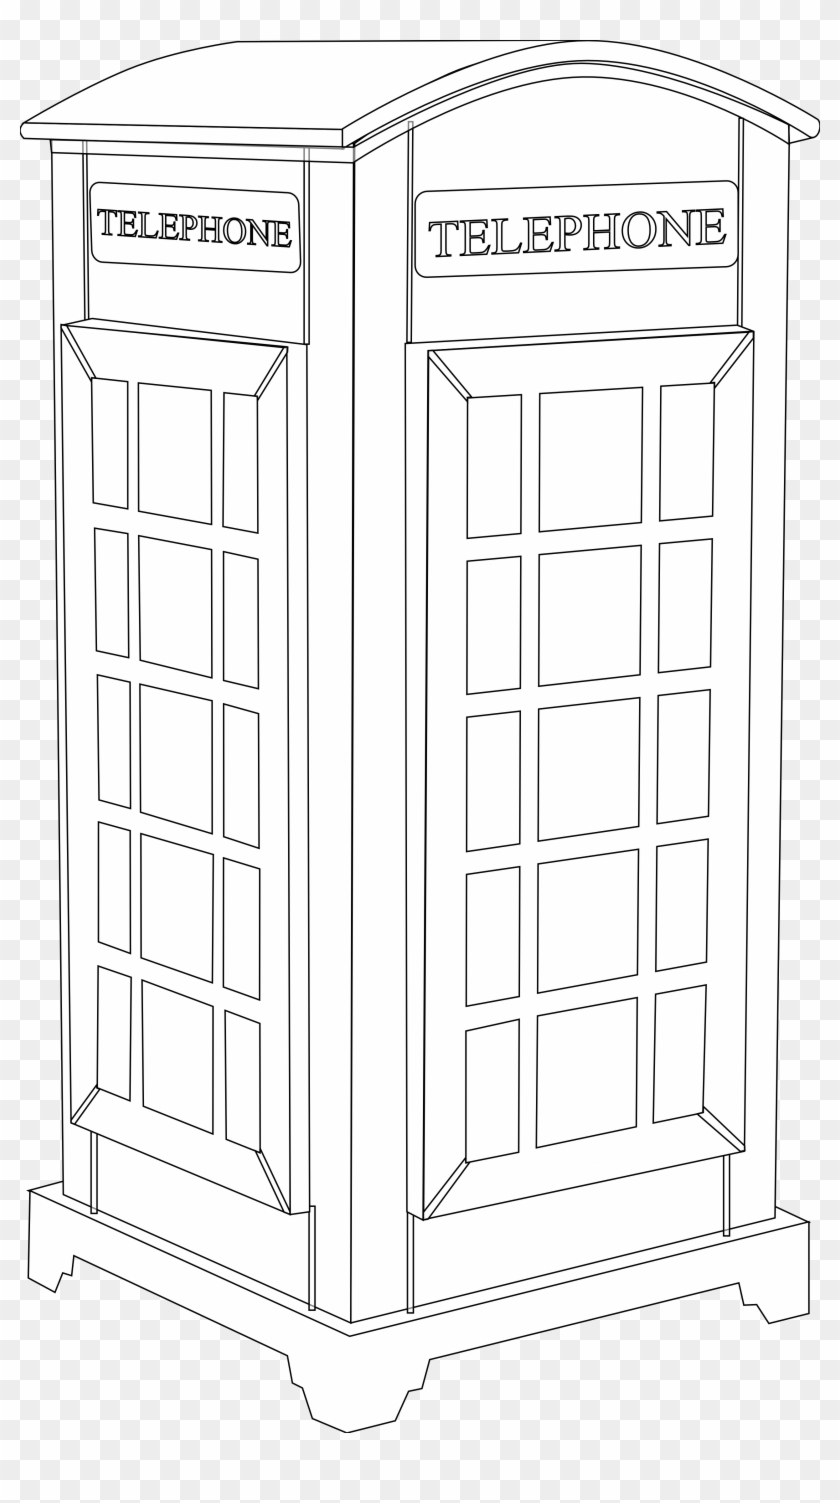 Phone - Phone Booth Colouring Page Clipart #4592449